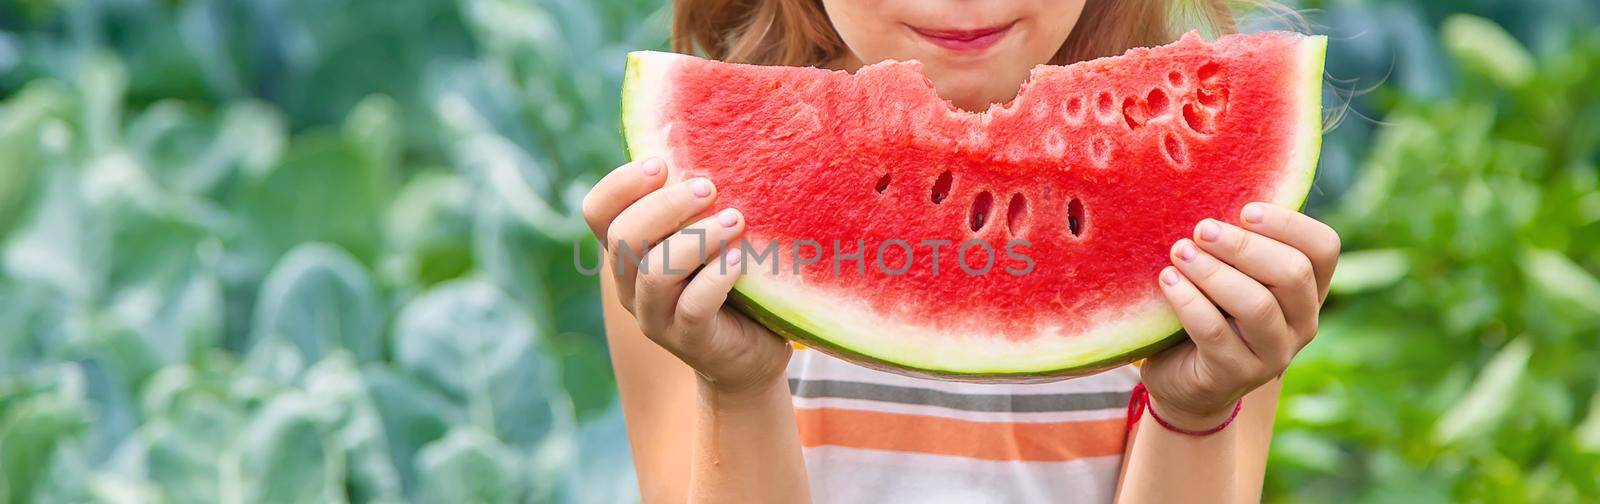 A child on a picnic eats a watermelon. Selective focus. food.